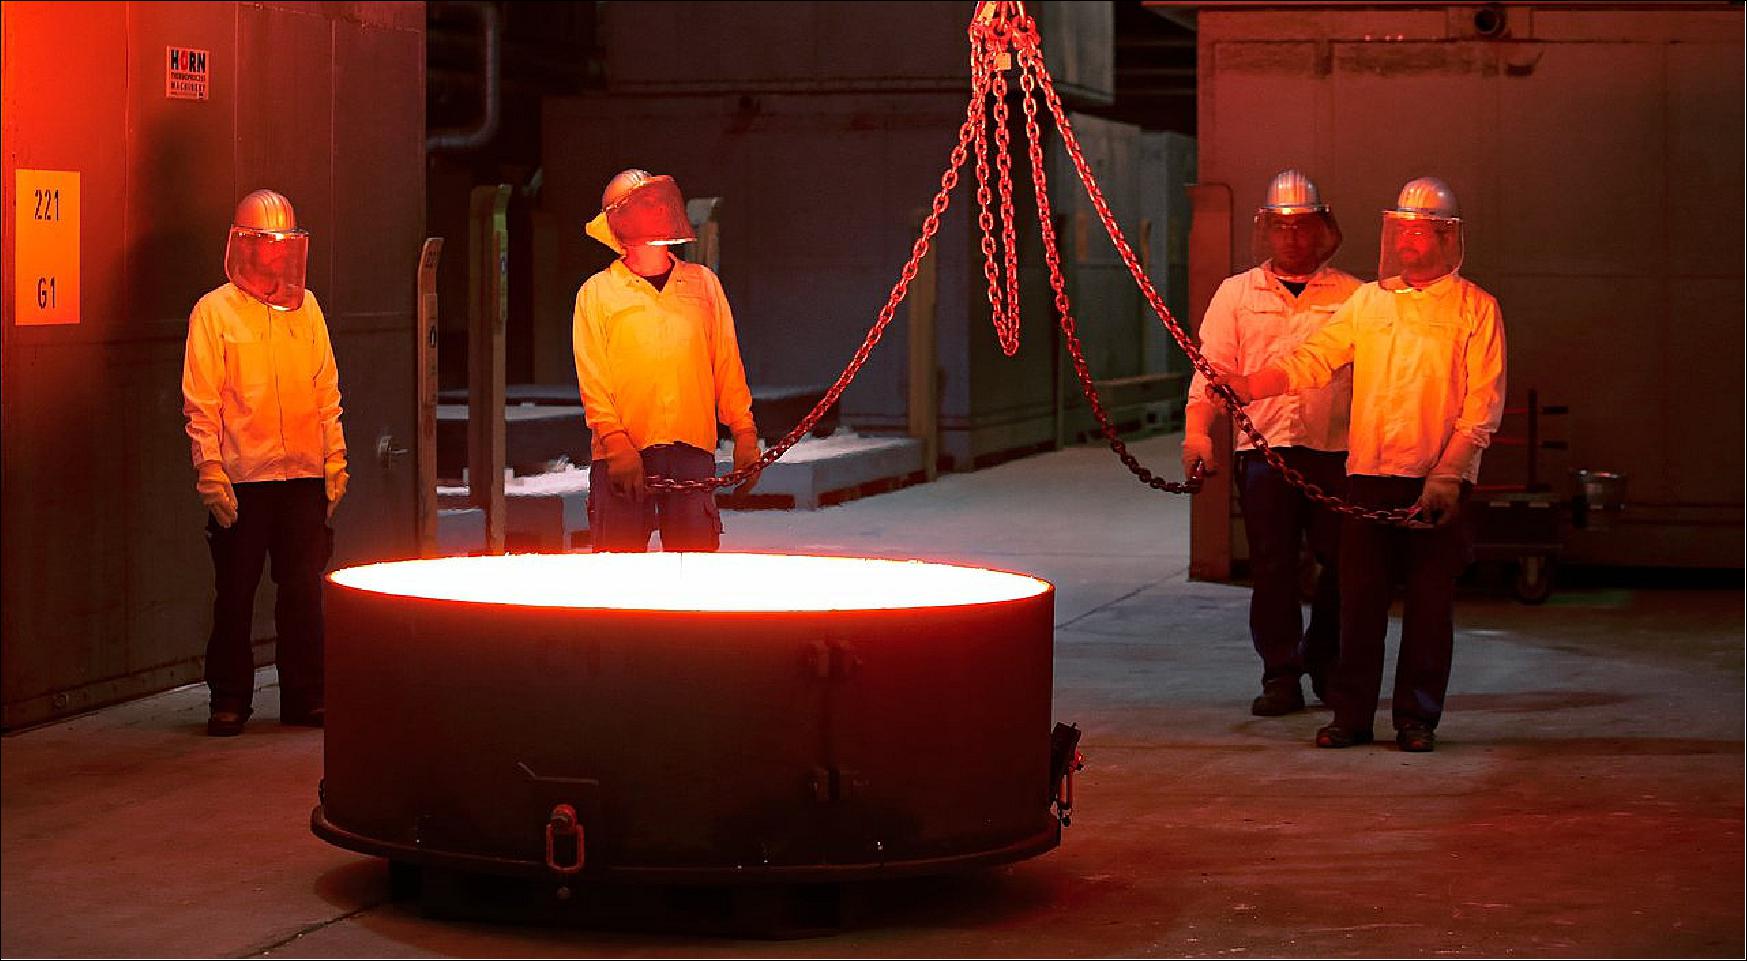 Figure 13: The first six hexagonal segments for the main mirror of ESO's ELT (Extremely Large Telescope) have been successfully cast by the German company SCHOTT at their facility in Mainz. These segments will form parts of the ELT's 39 meter main mirror, which will have 798 segments in total when completed. The ELT will be the largest optical telescope in the world when it sees first light in 2024 (image credit: SCHOTT/ESO)